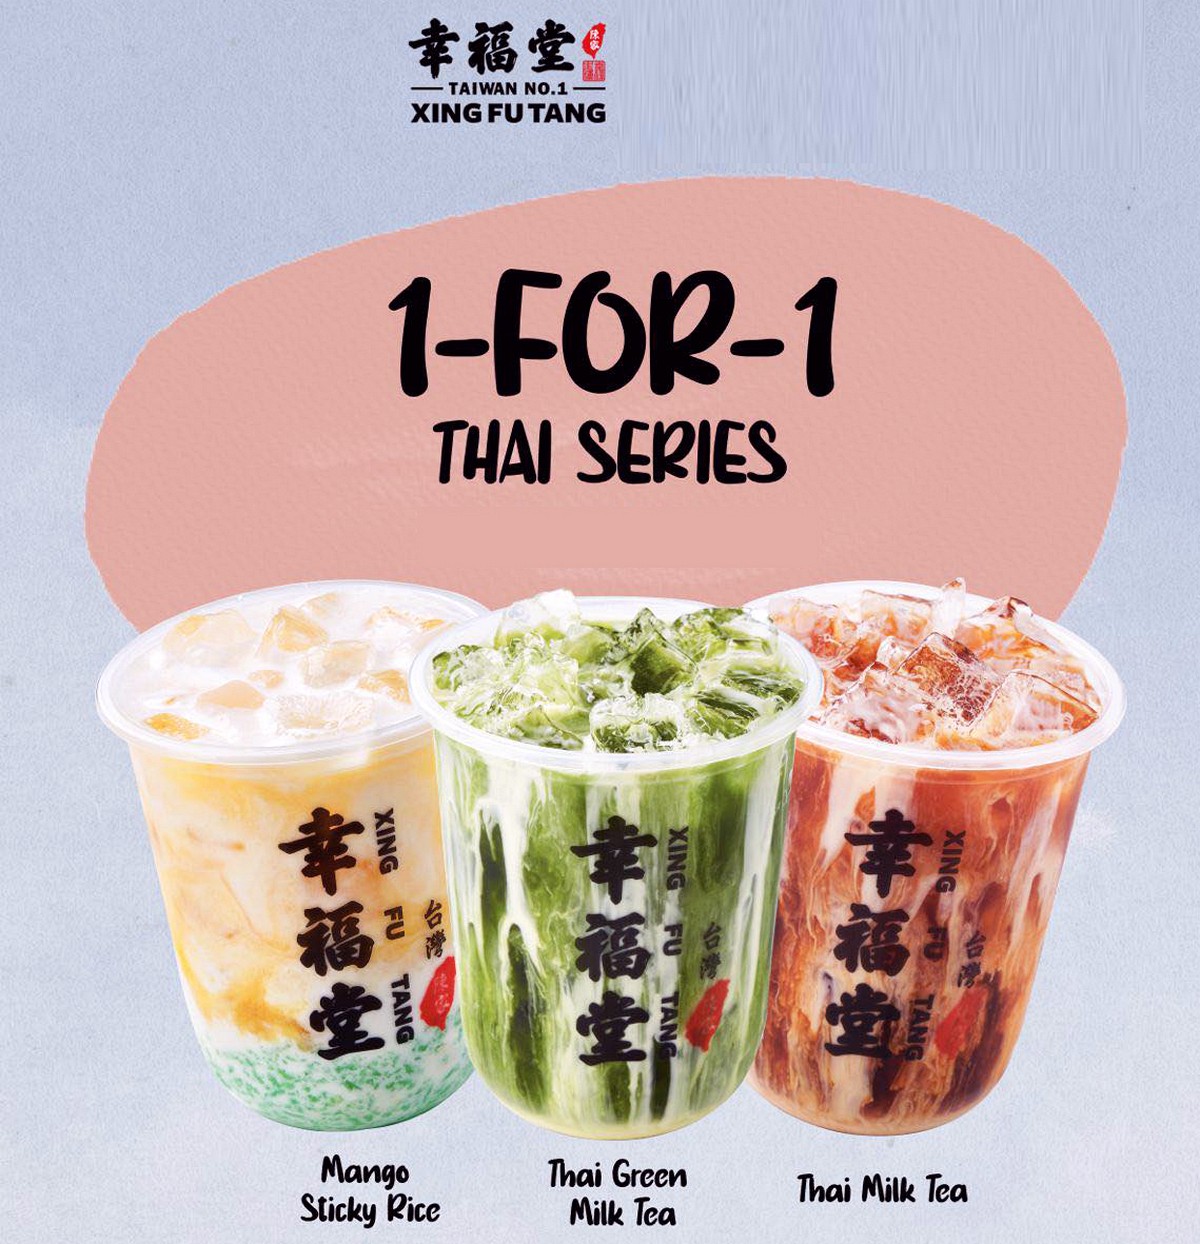 1-for-1-Promo-Week-1-Xing-Fu-Tang-2021-Singapore-Warehouse-Clearance-Sale-Beverages-Thai-Milk-Tea-Freebies 1-30 Jun 2021: Xing Fu Tang Happy 2nd Birthday 1-For-1 Promo on Thailand Series Milk Tea for Delivery & Takeaway at All Outlets in Singapore